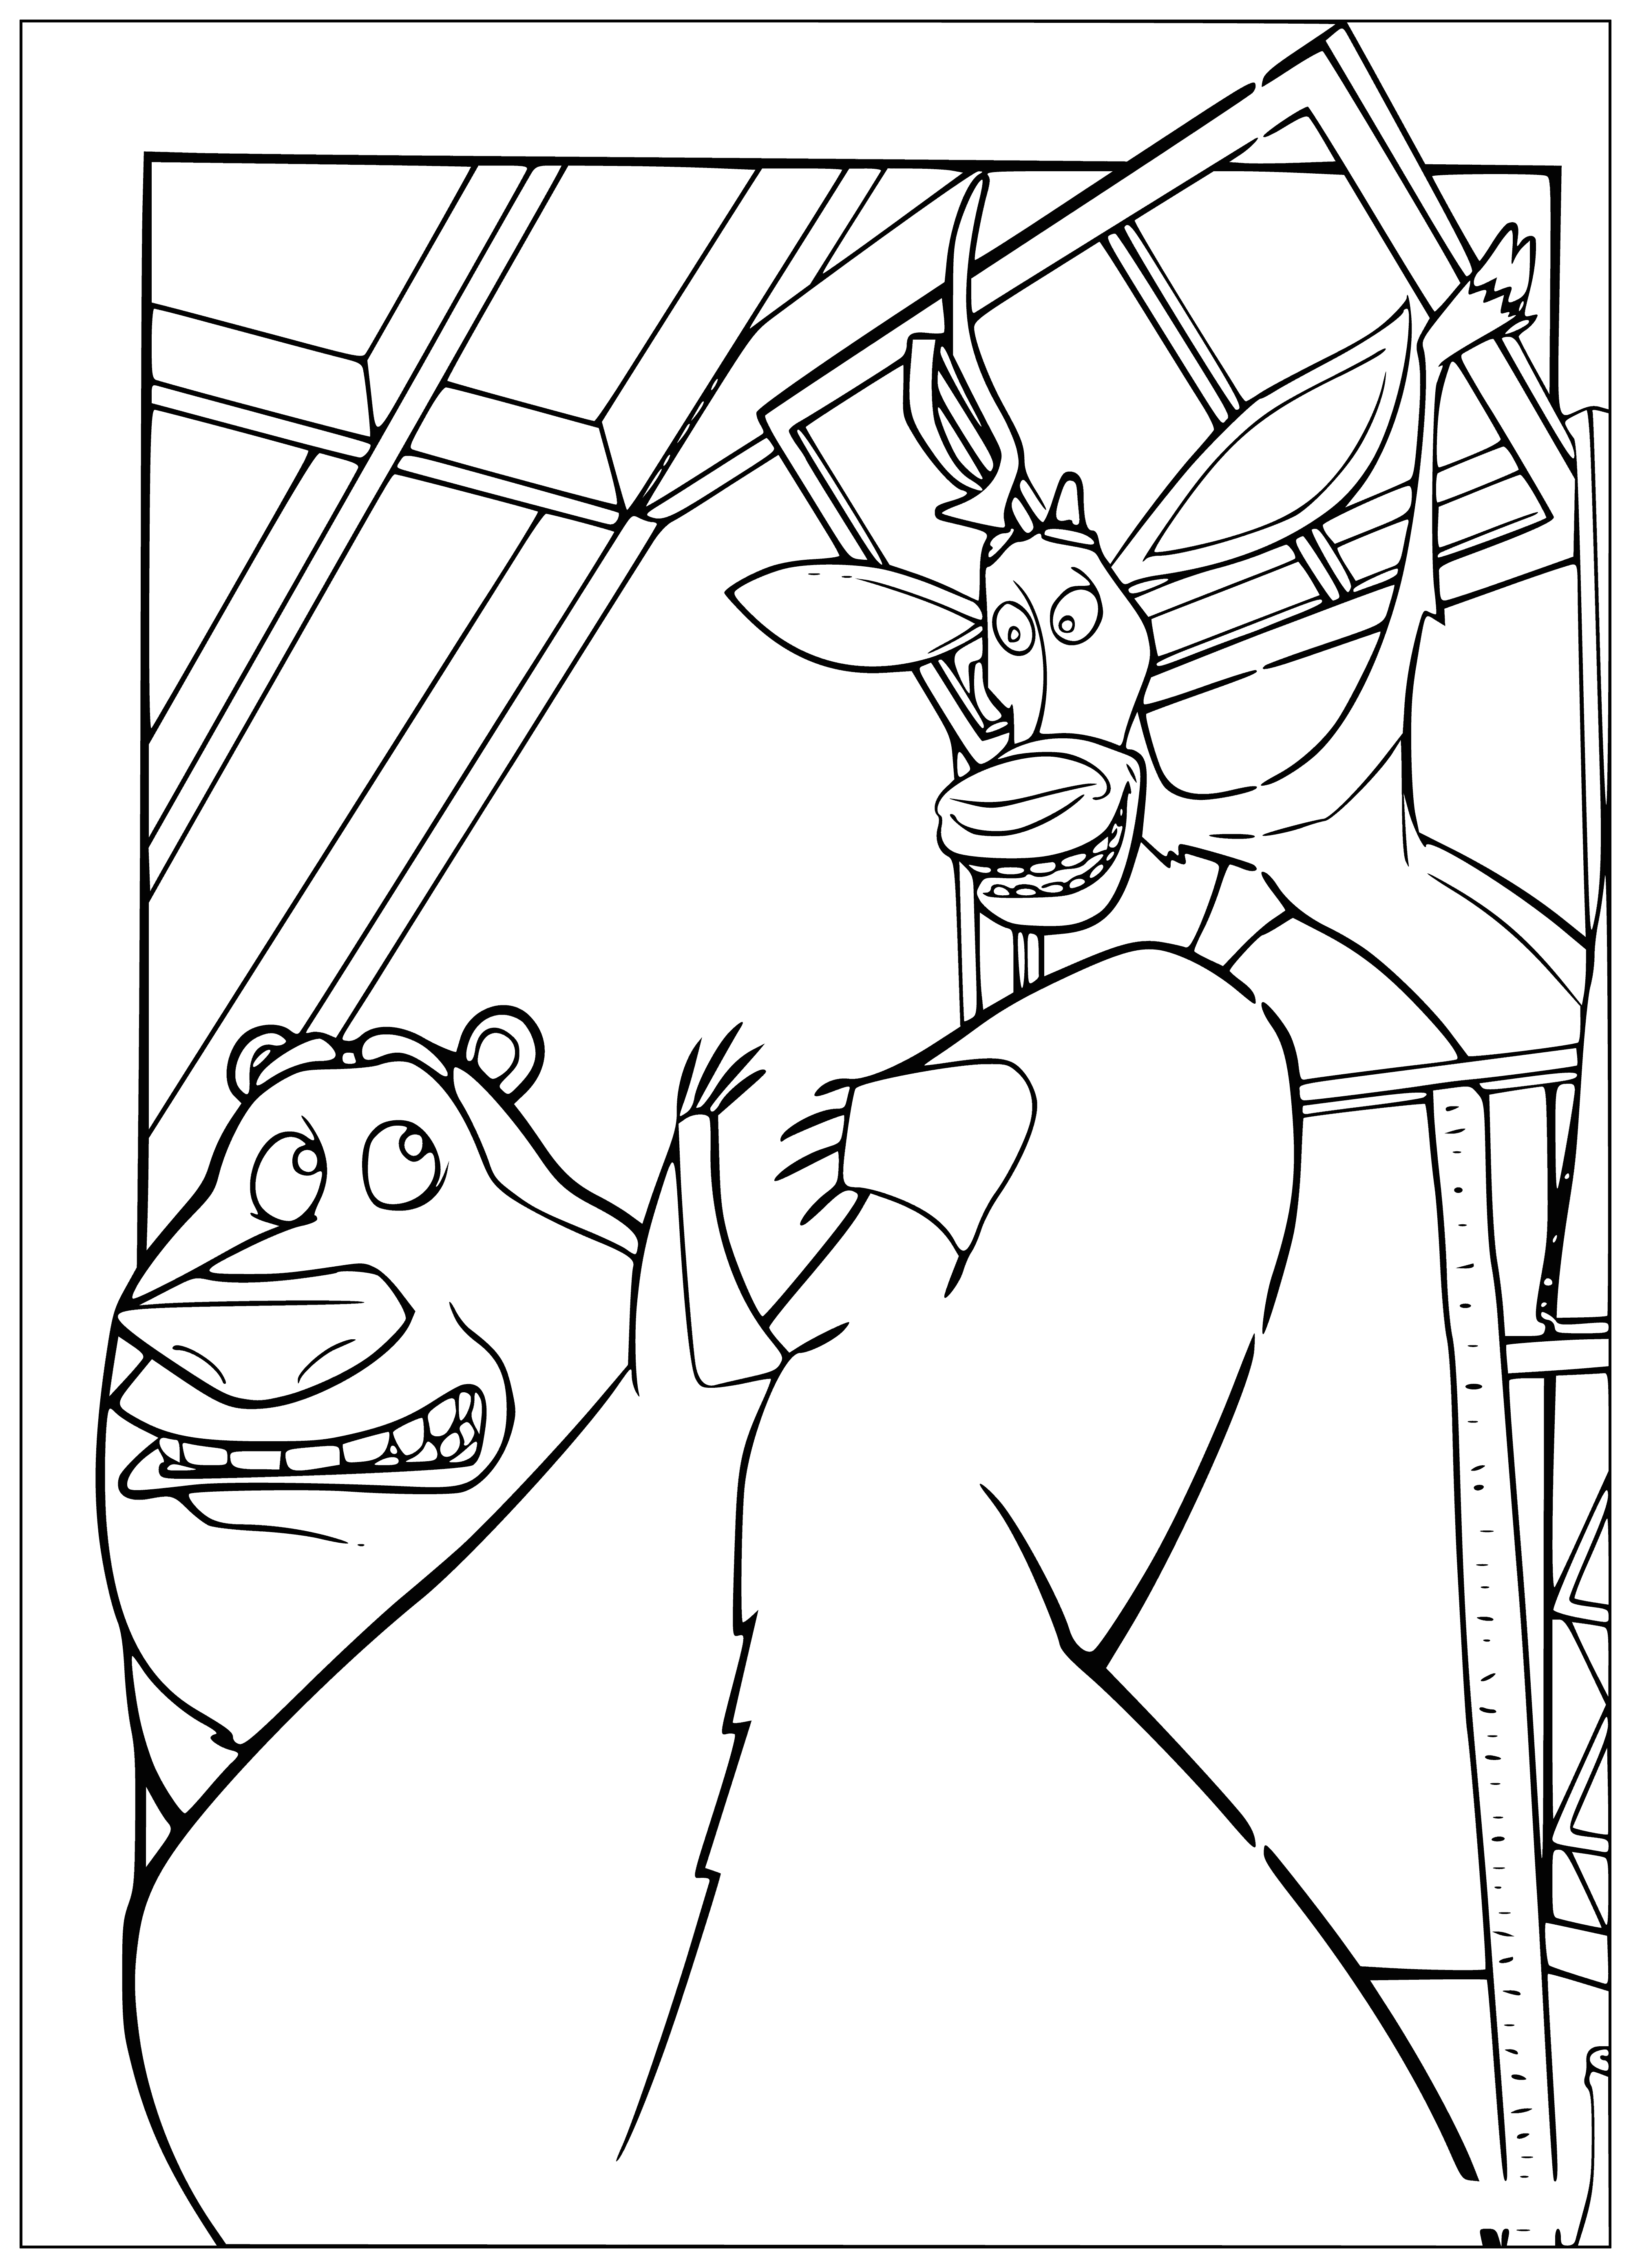 Uninvited Deer coloring page